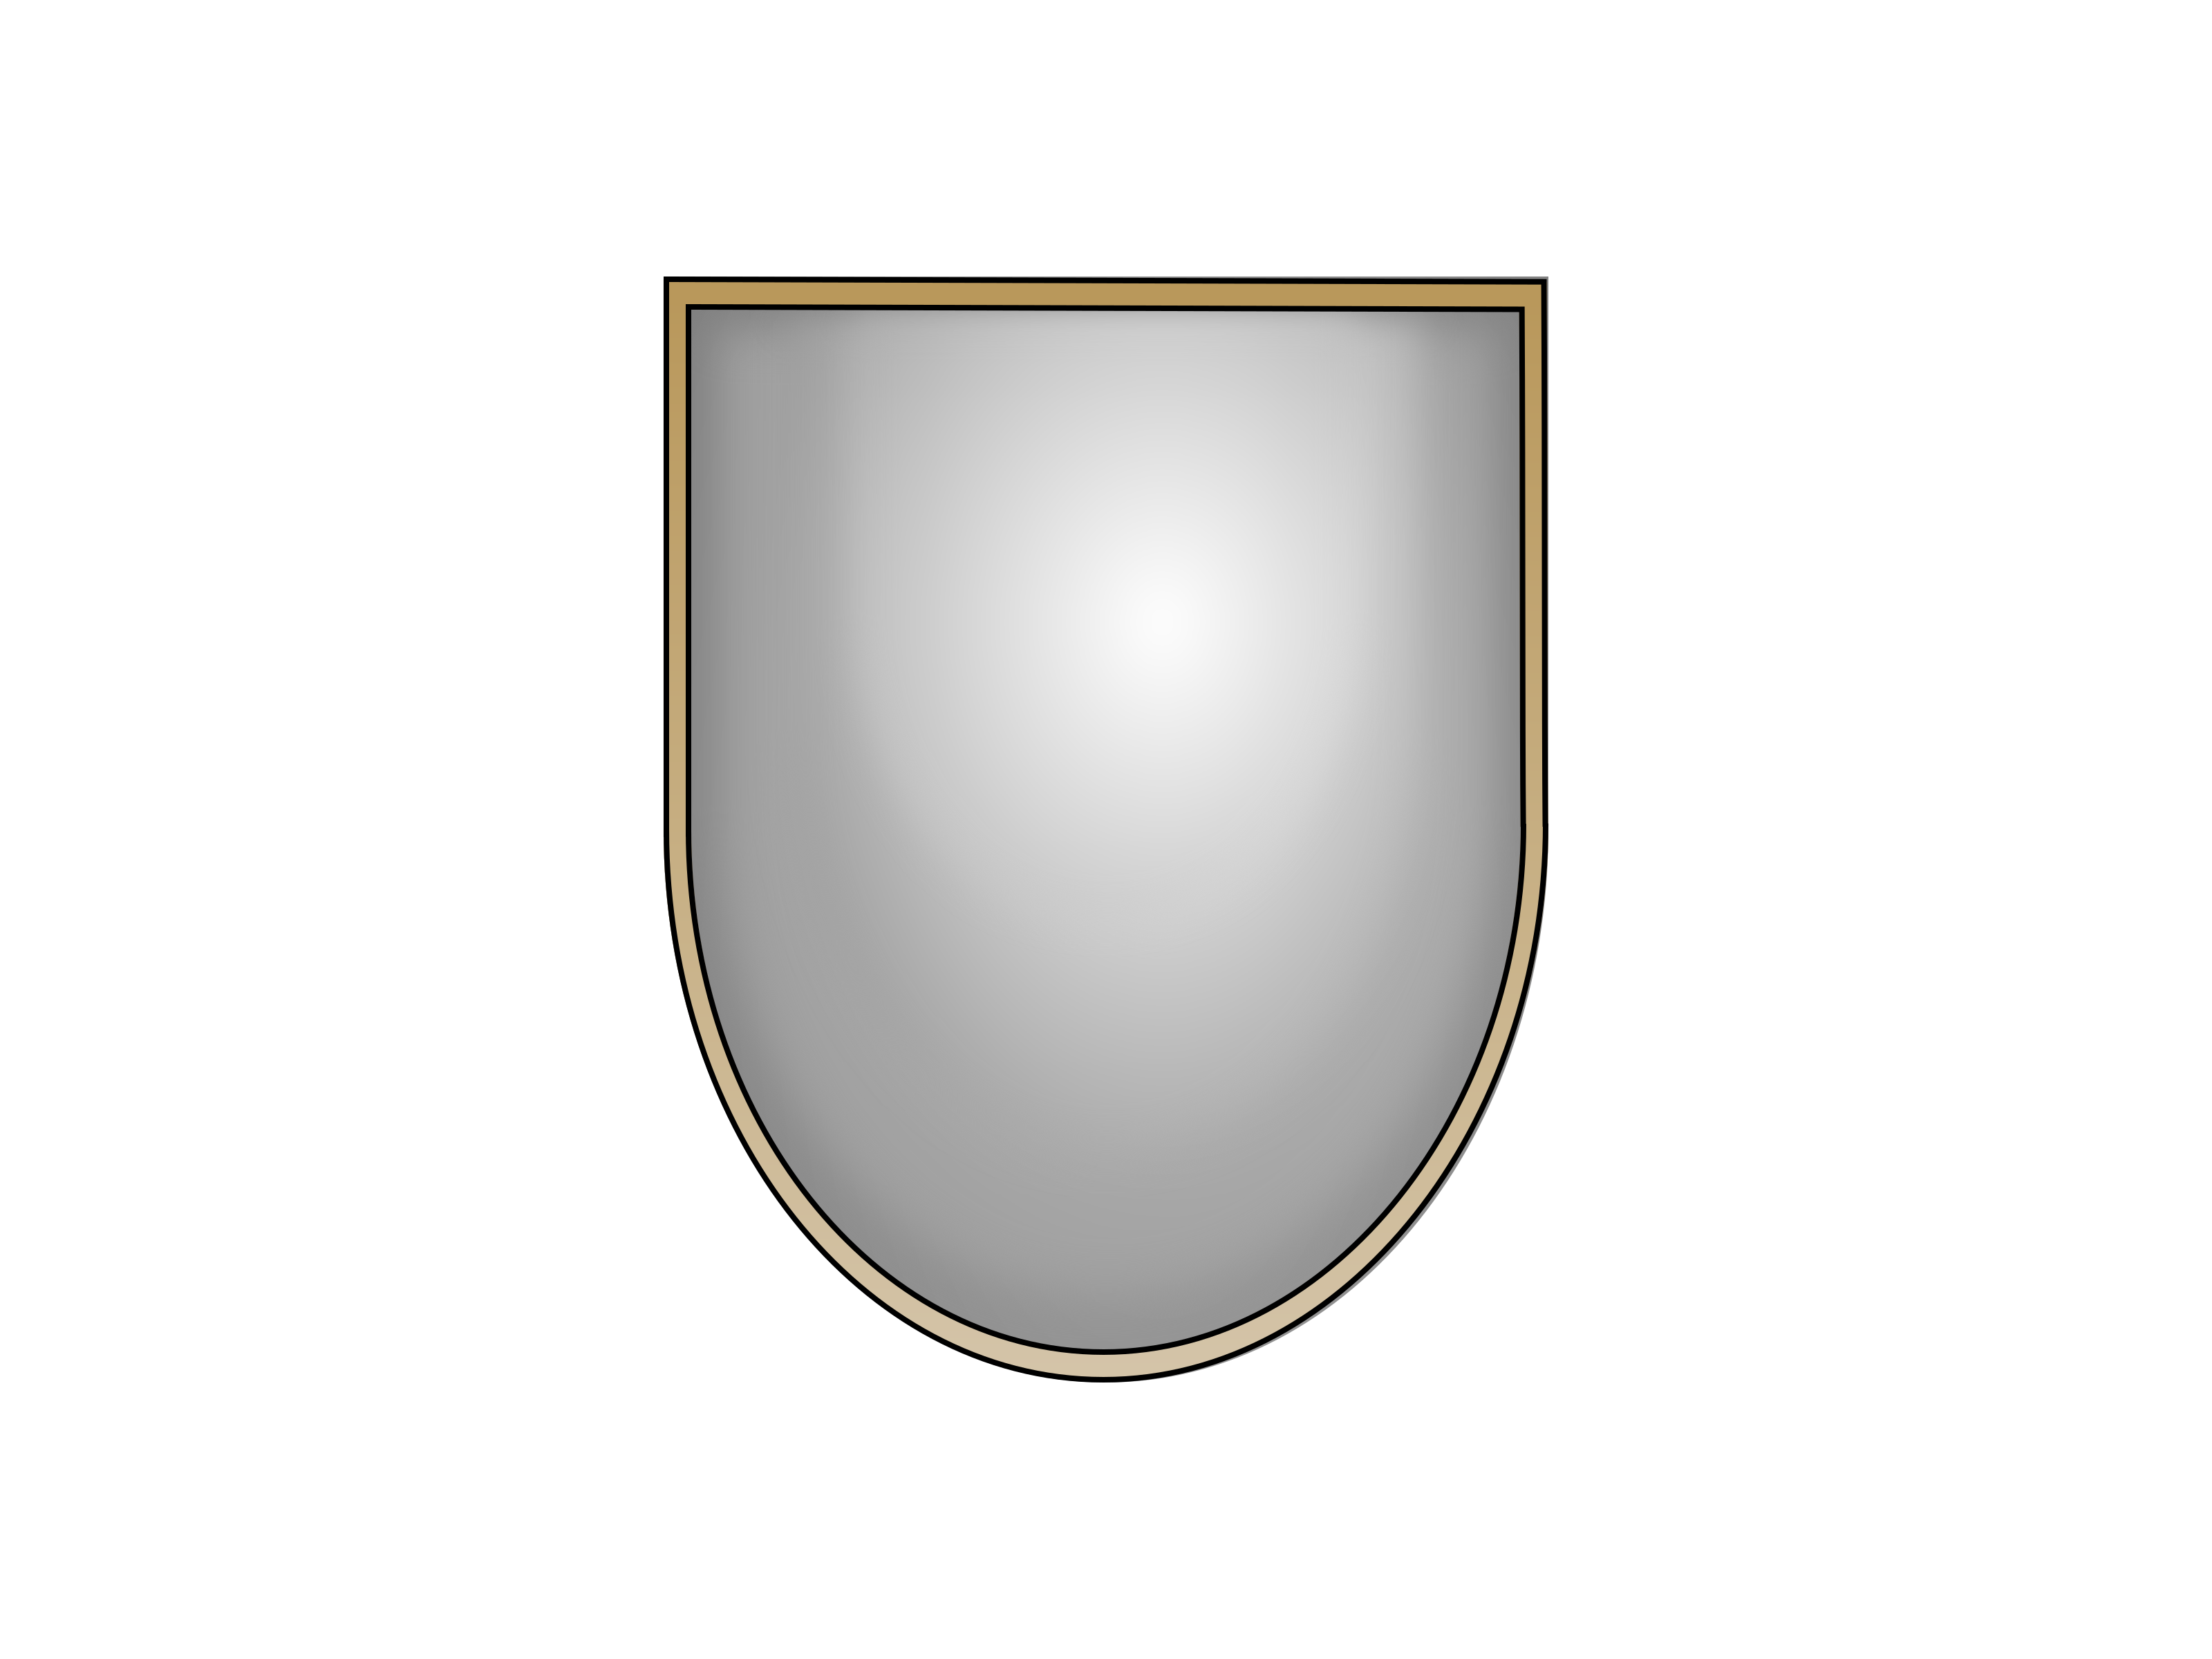 Clipart Shield Pdf Clipart Shield Pdf Transparent Free For Download On Webstockreview 2020 - clipart shield pdf roblox t shirt png cliparts cartoons